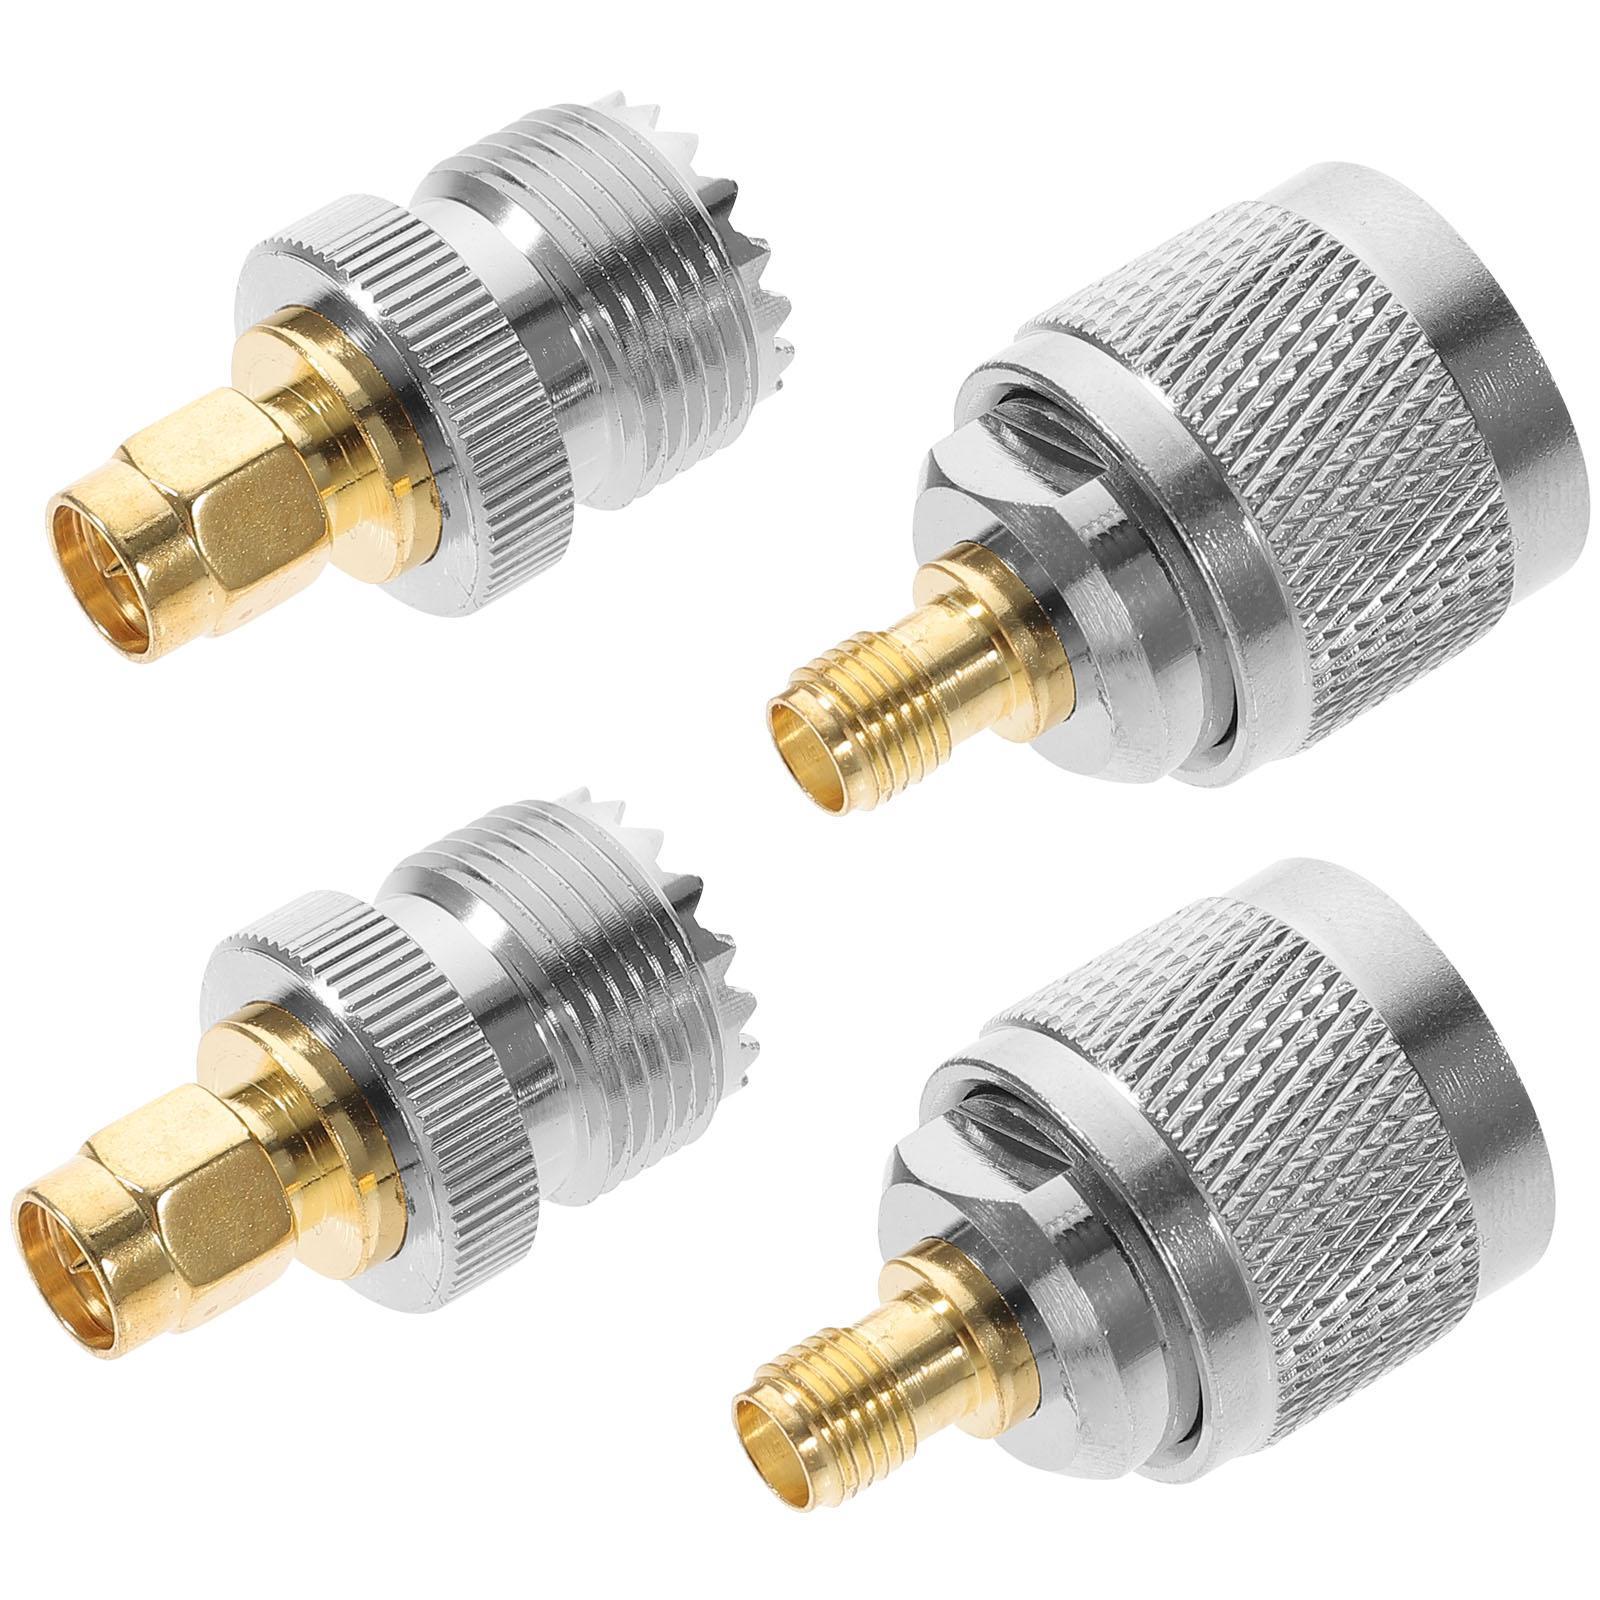 Pl-259 Connectors RF Coaxial Adapter So239 Connection Electronic